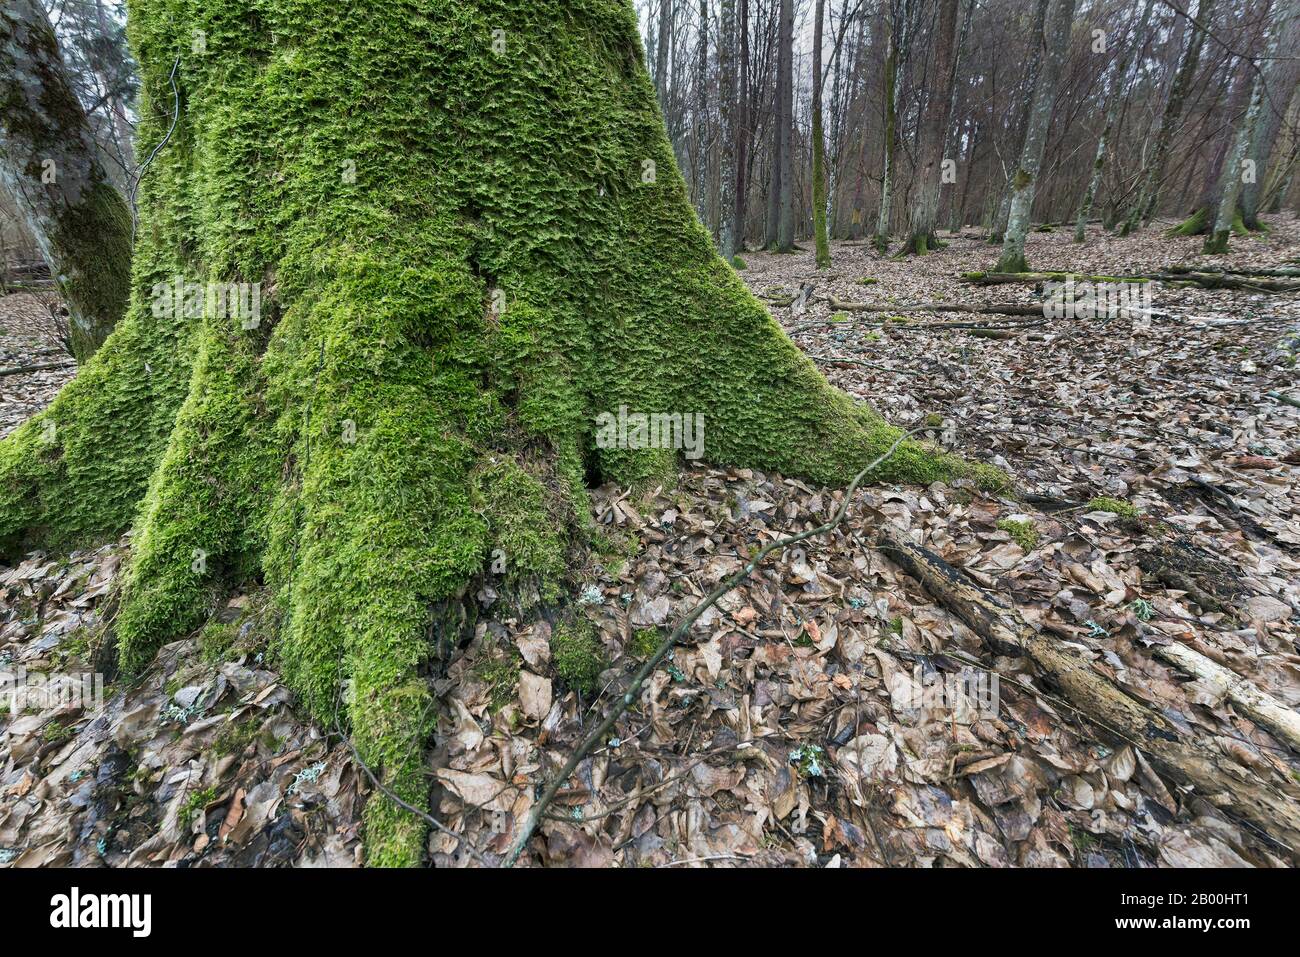 Parc Narodowy, Bialowieza, Pologne Banque D'Images